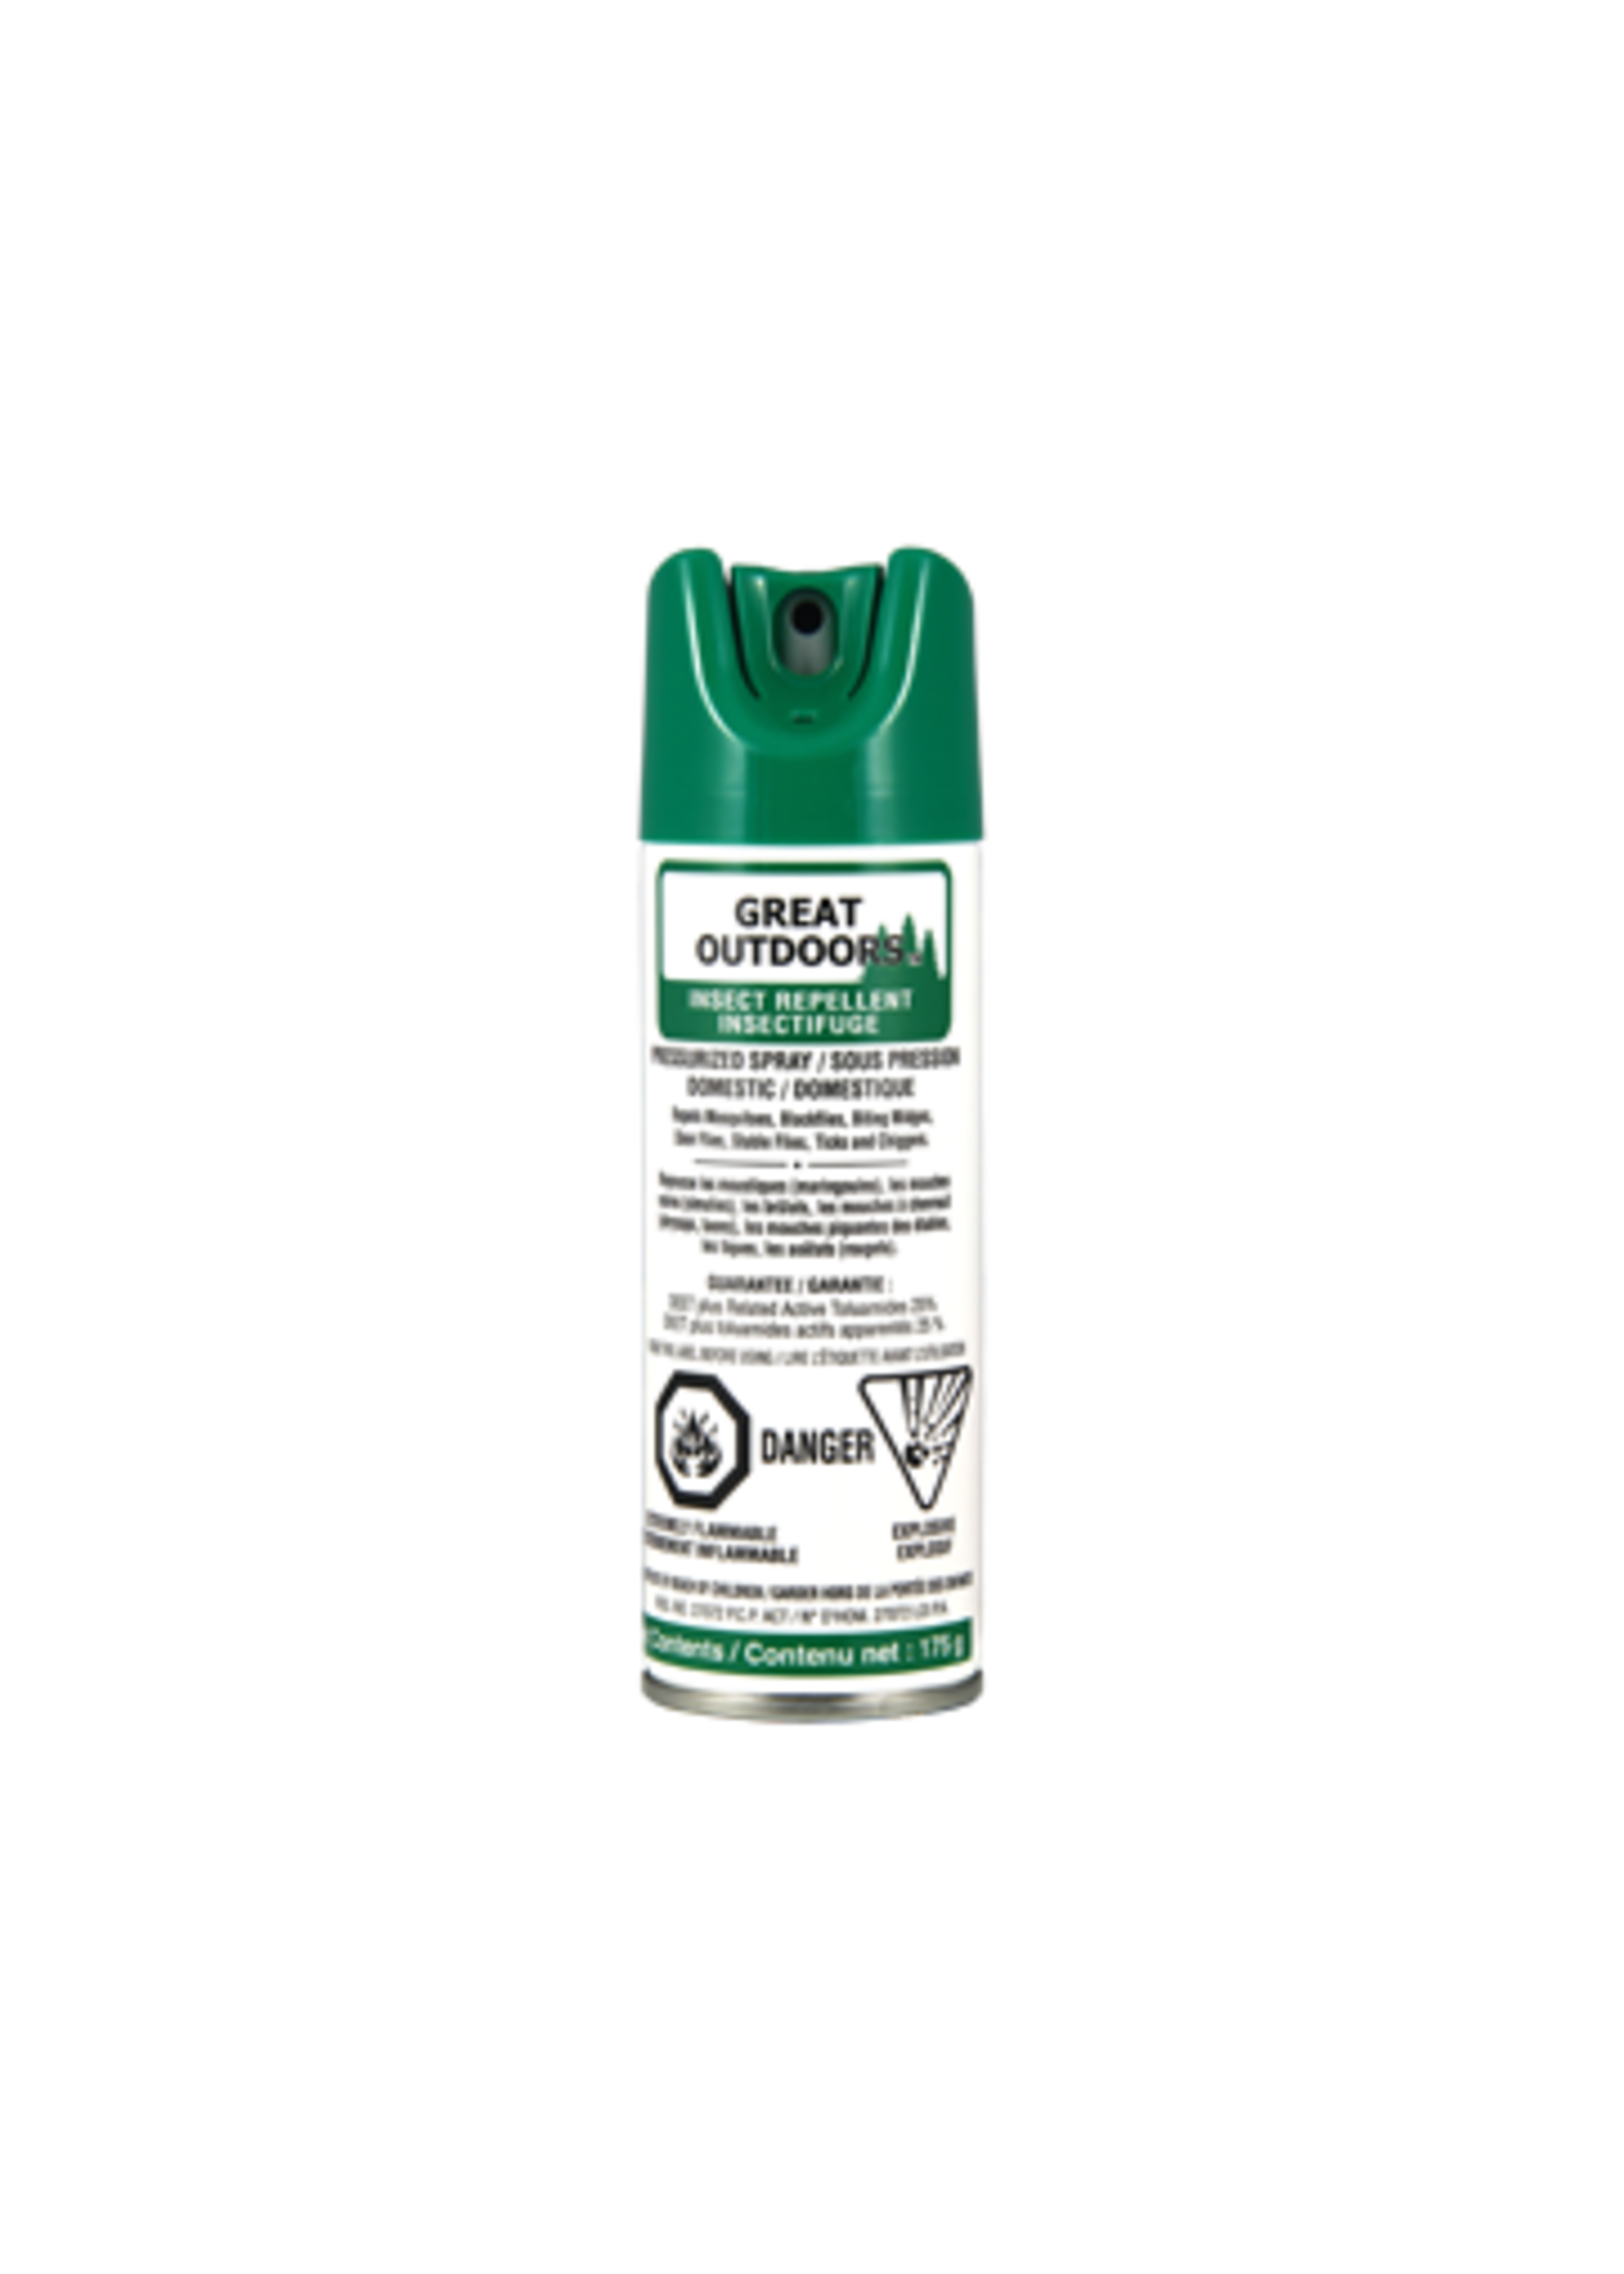 Great Outdoors insect repellent pressurized spray 175g.